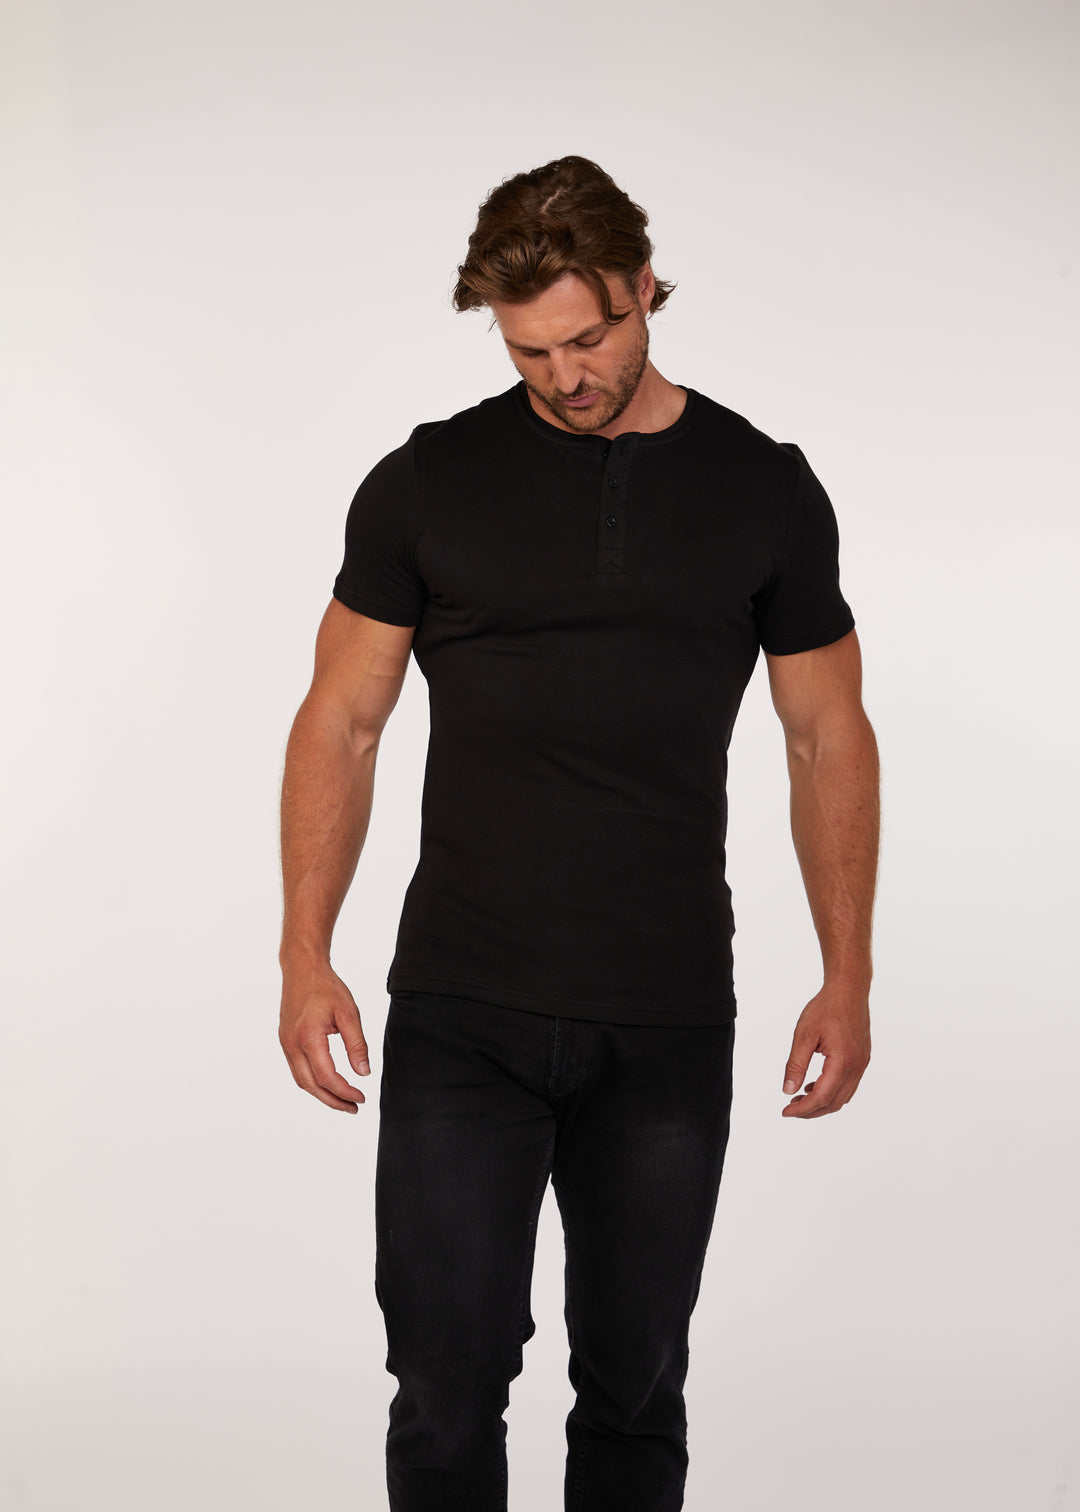 Mens Black Athletic Fit Henley in Short Sleeve. A Proportionally Fitted and Muscle Fit Henley. The best henley for muscular guys.